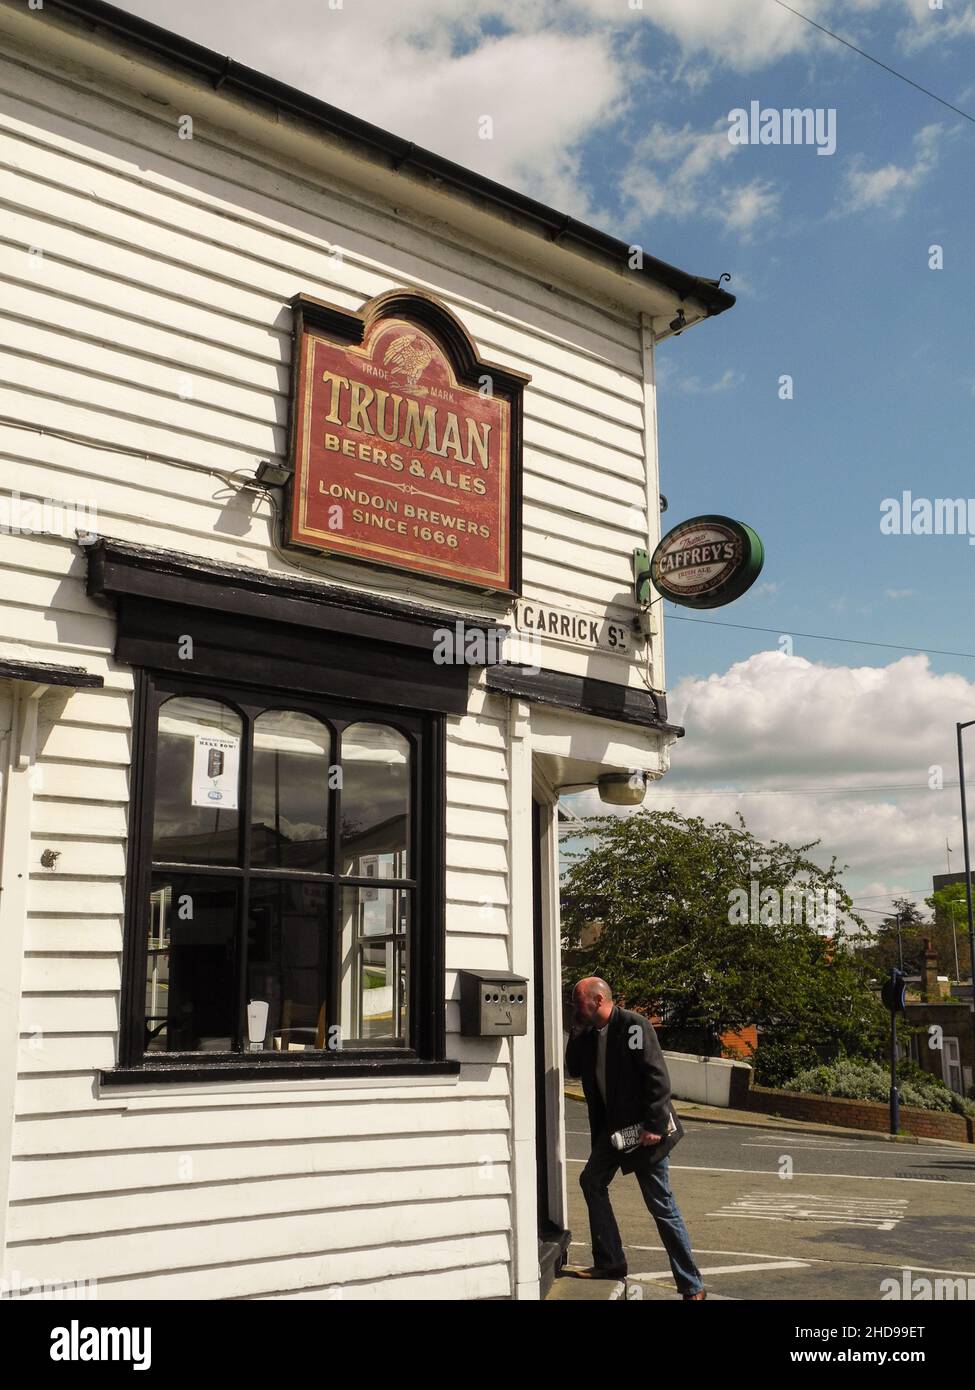 Truman Beers and Ales sign outside the Railway Bell, a Caffrey's pub in Gravesend, Kent, England, U.K. Stock Photo